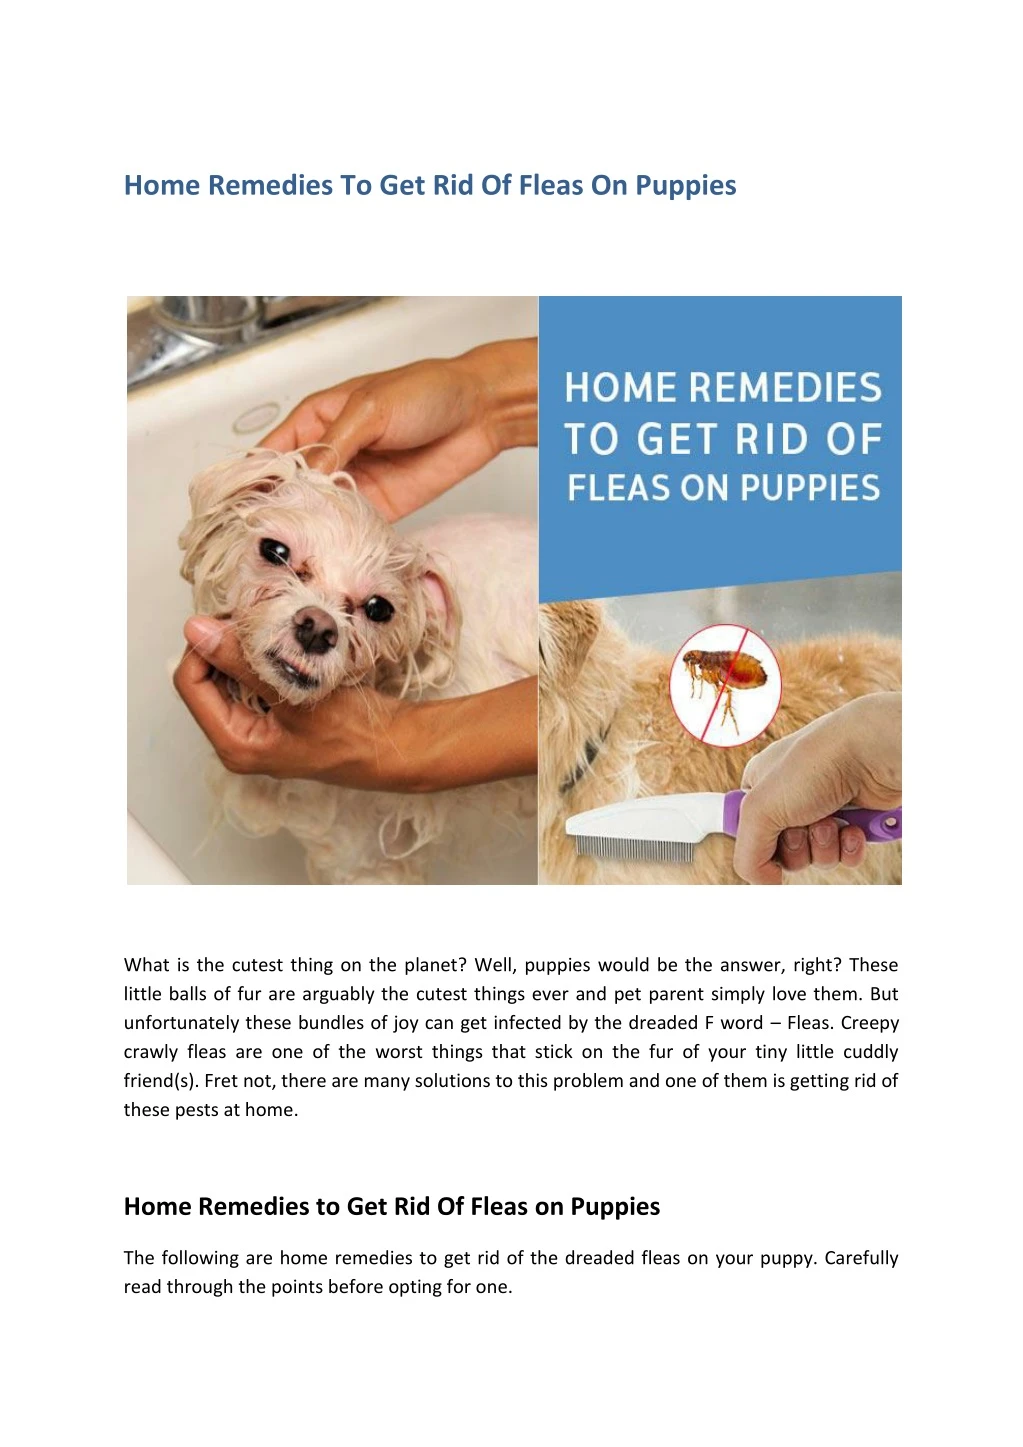 home remedies to get rid of fleas on puppies